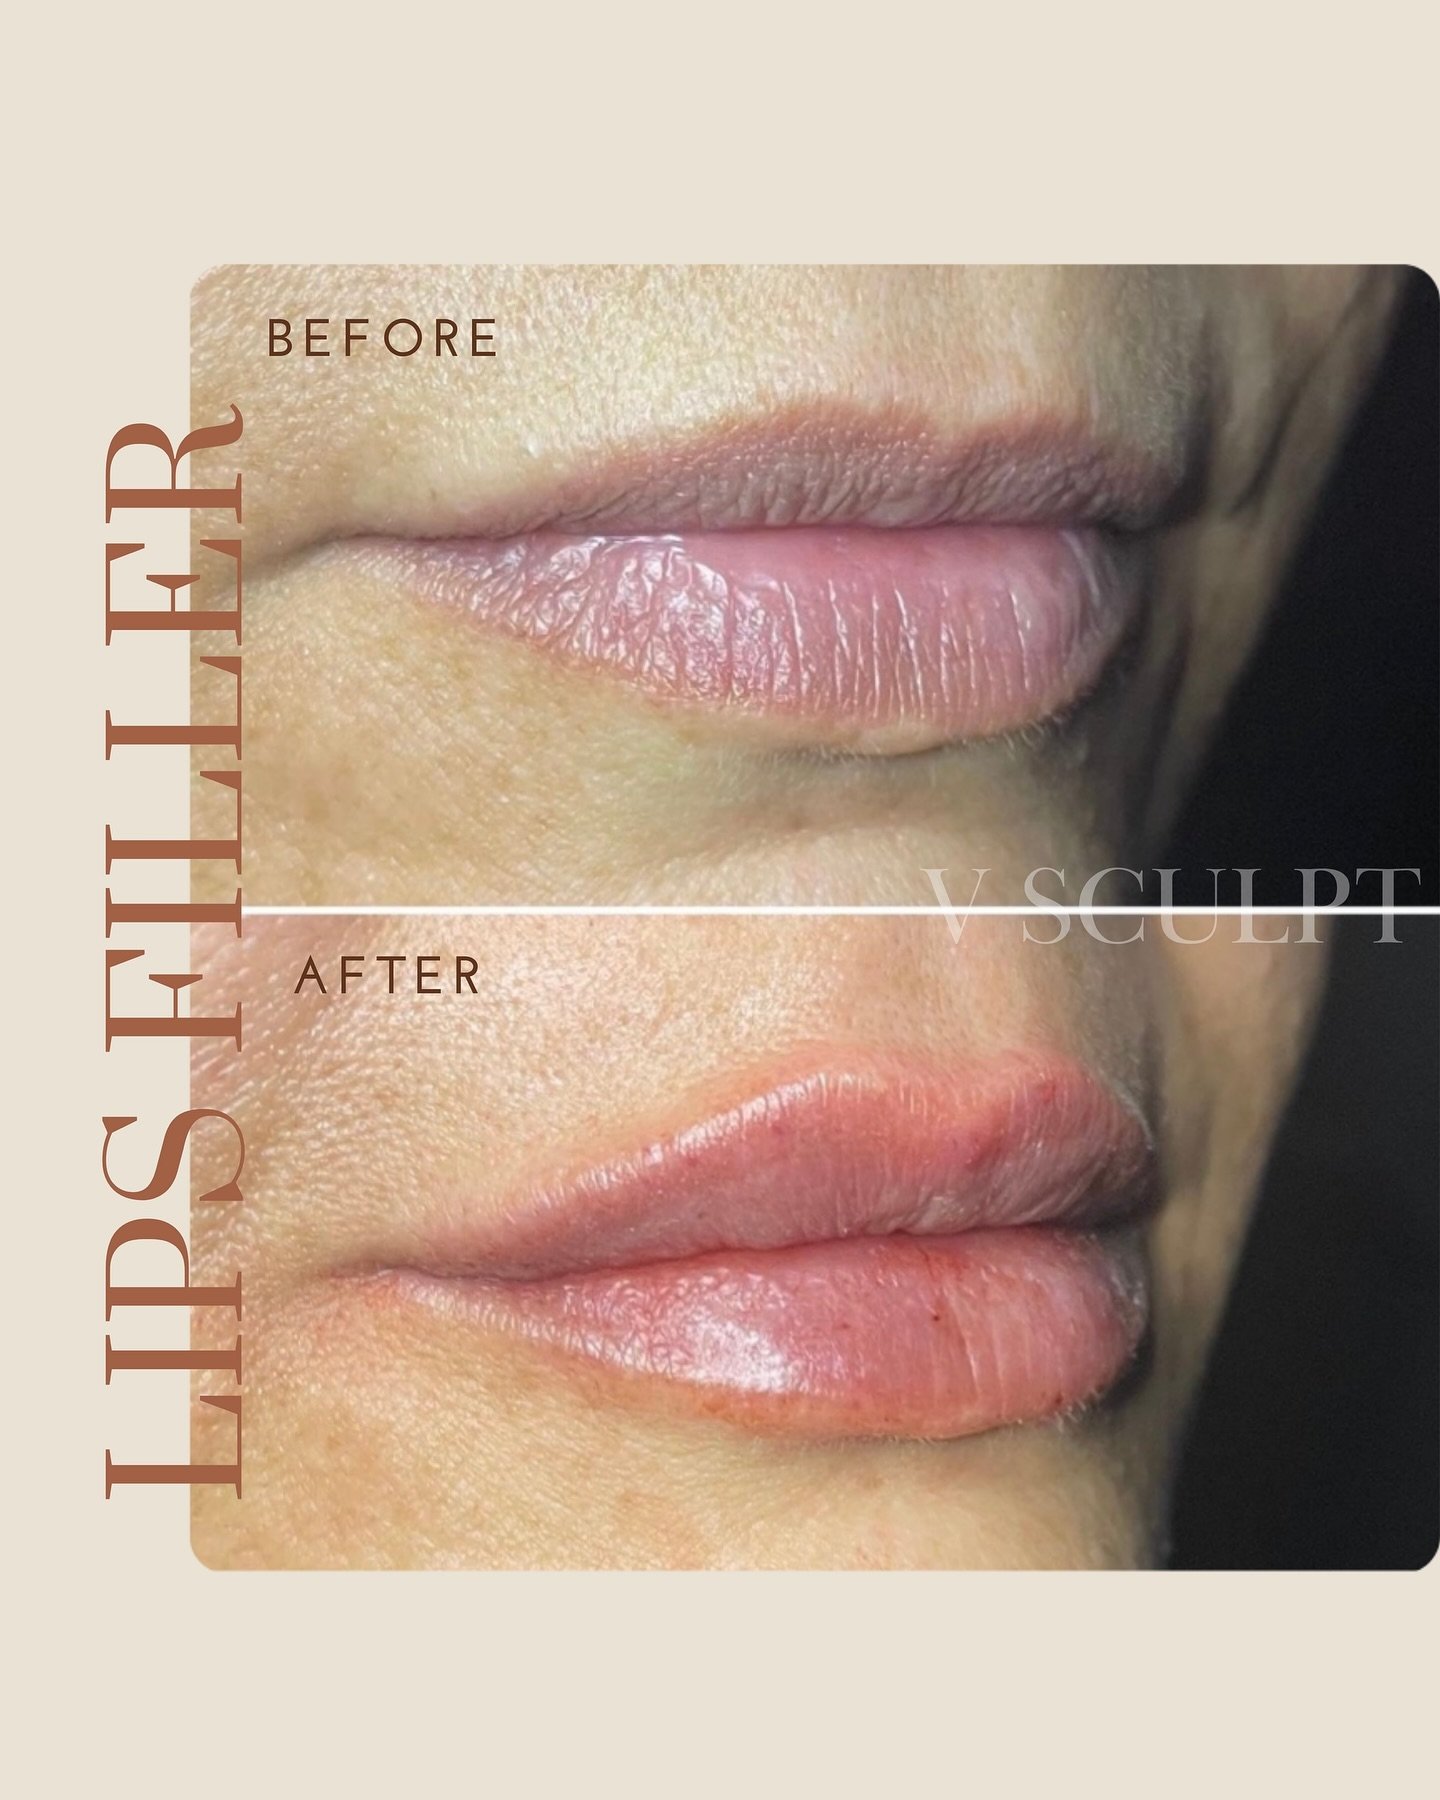 Check out the stunning before and after results and envision the possibilities of having Your lips beautifully transformed✨

#lipfiller #aesthetic #lipinjections #fyp #beautygoals #lipgoals #dreamlips #faceglow #beautytips